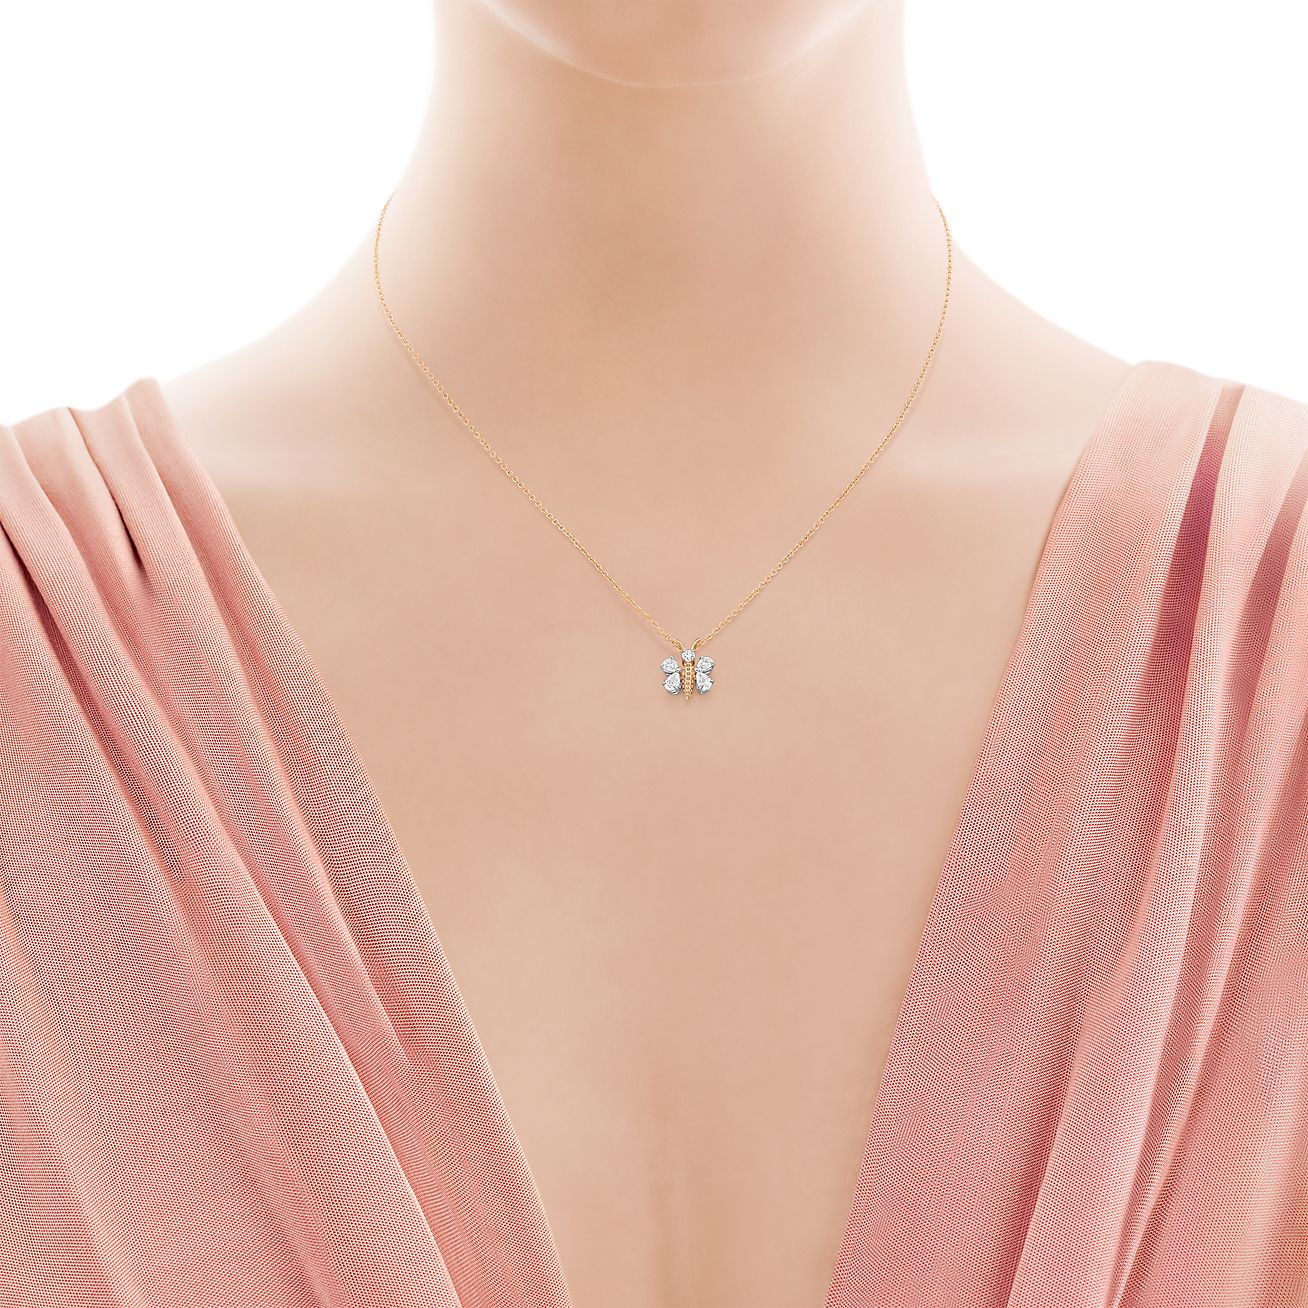 butterfly pendant necklace tiffany